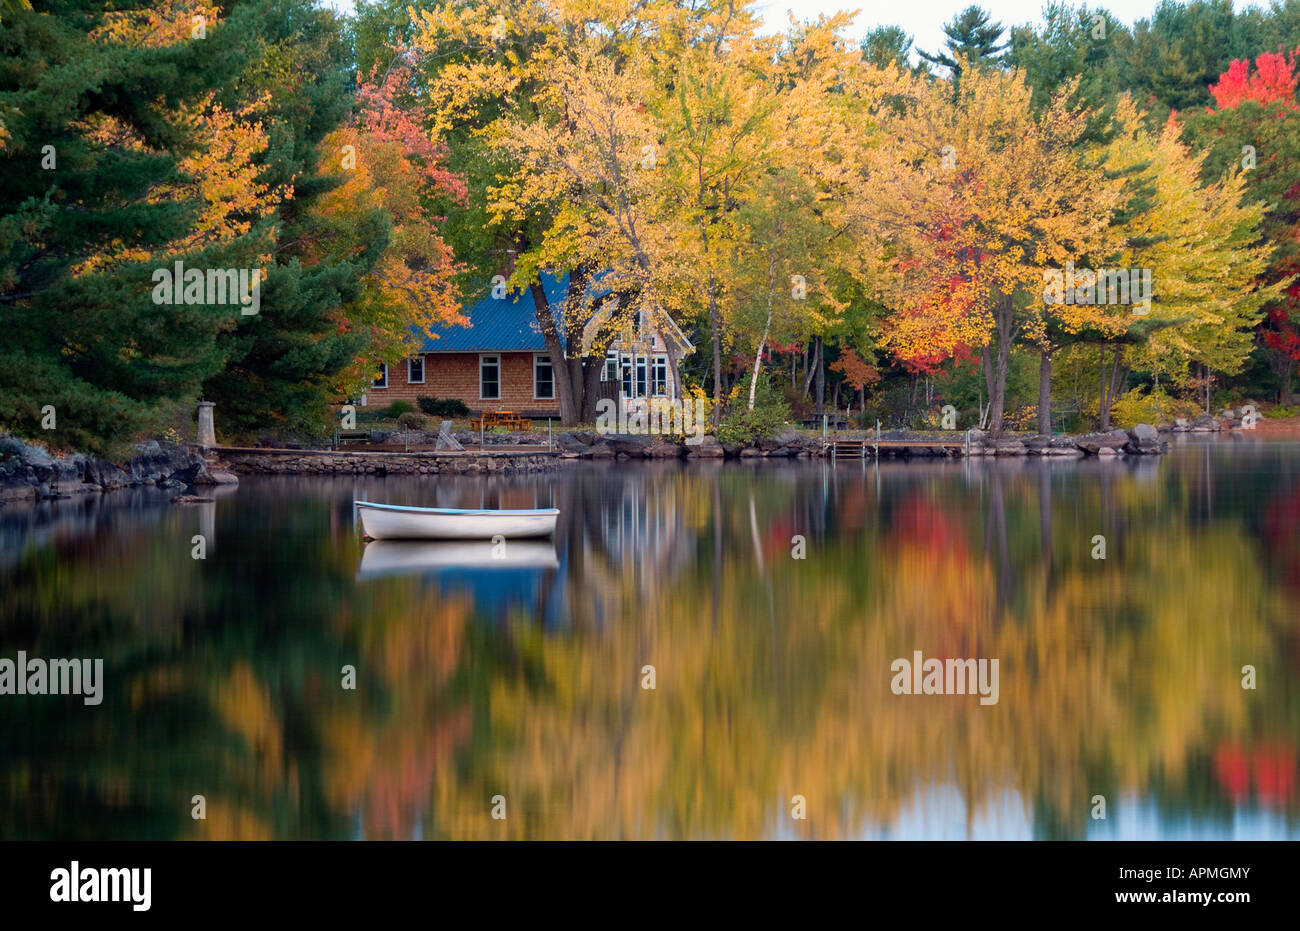 Peaceful quiet scene of lake and small boat in Long Lake in Bridgton Maine in New England colorful scene with reflections Stock Photo